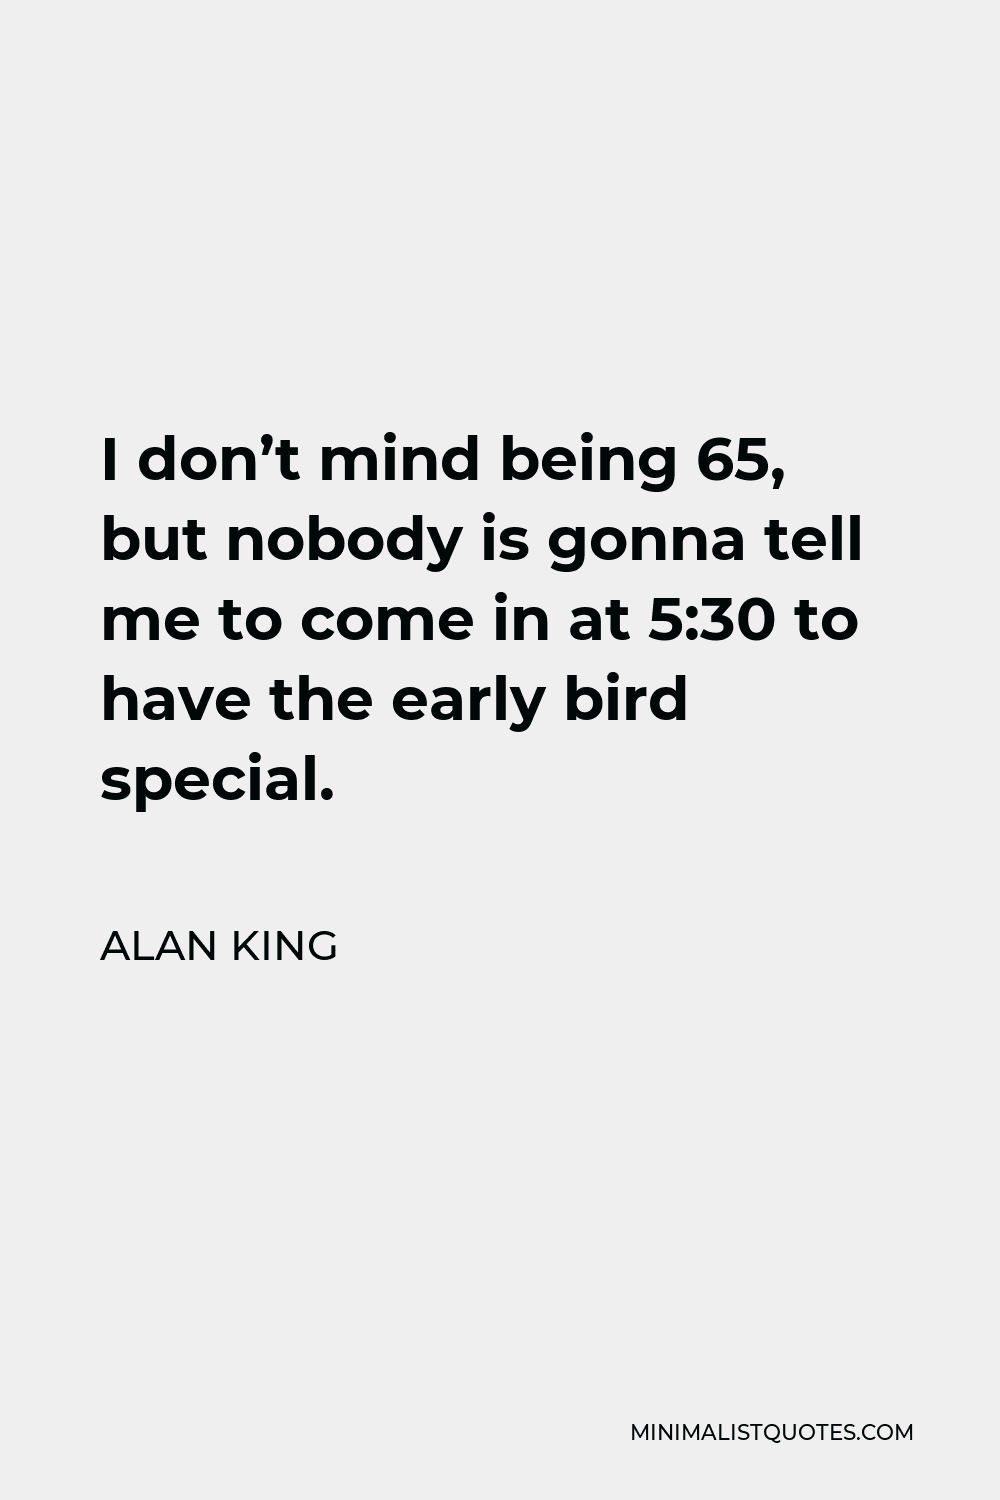 Alan King Quote - I don’t mind being 65, but nobody is gonna tell me to come in at 5:30 to have the early bird special.